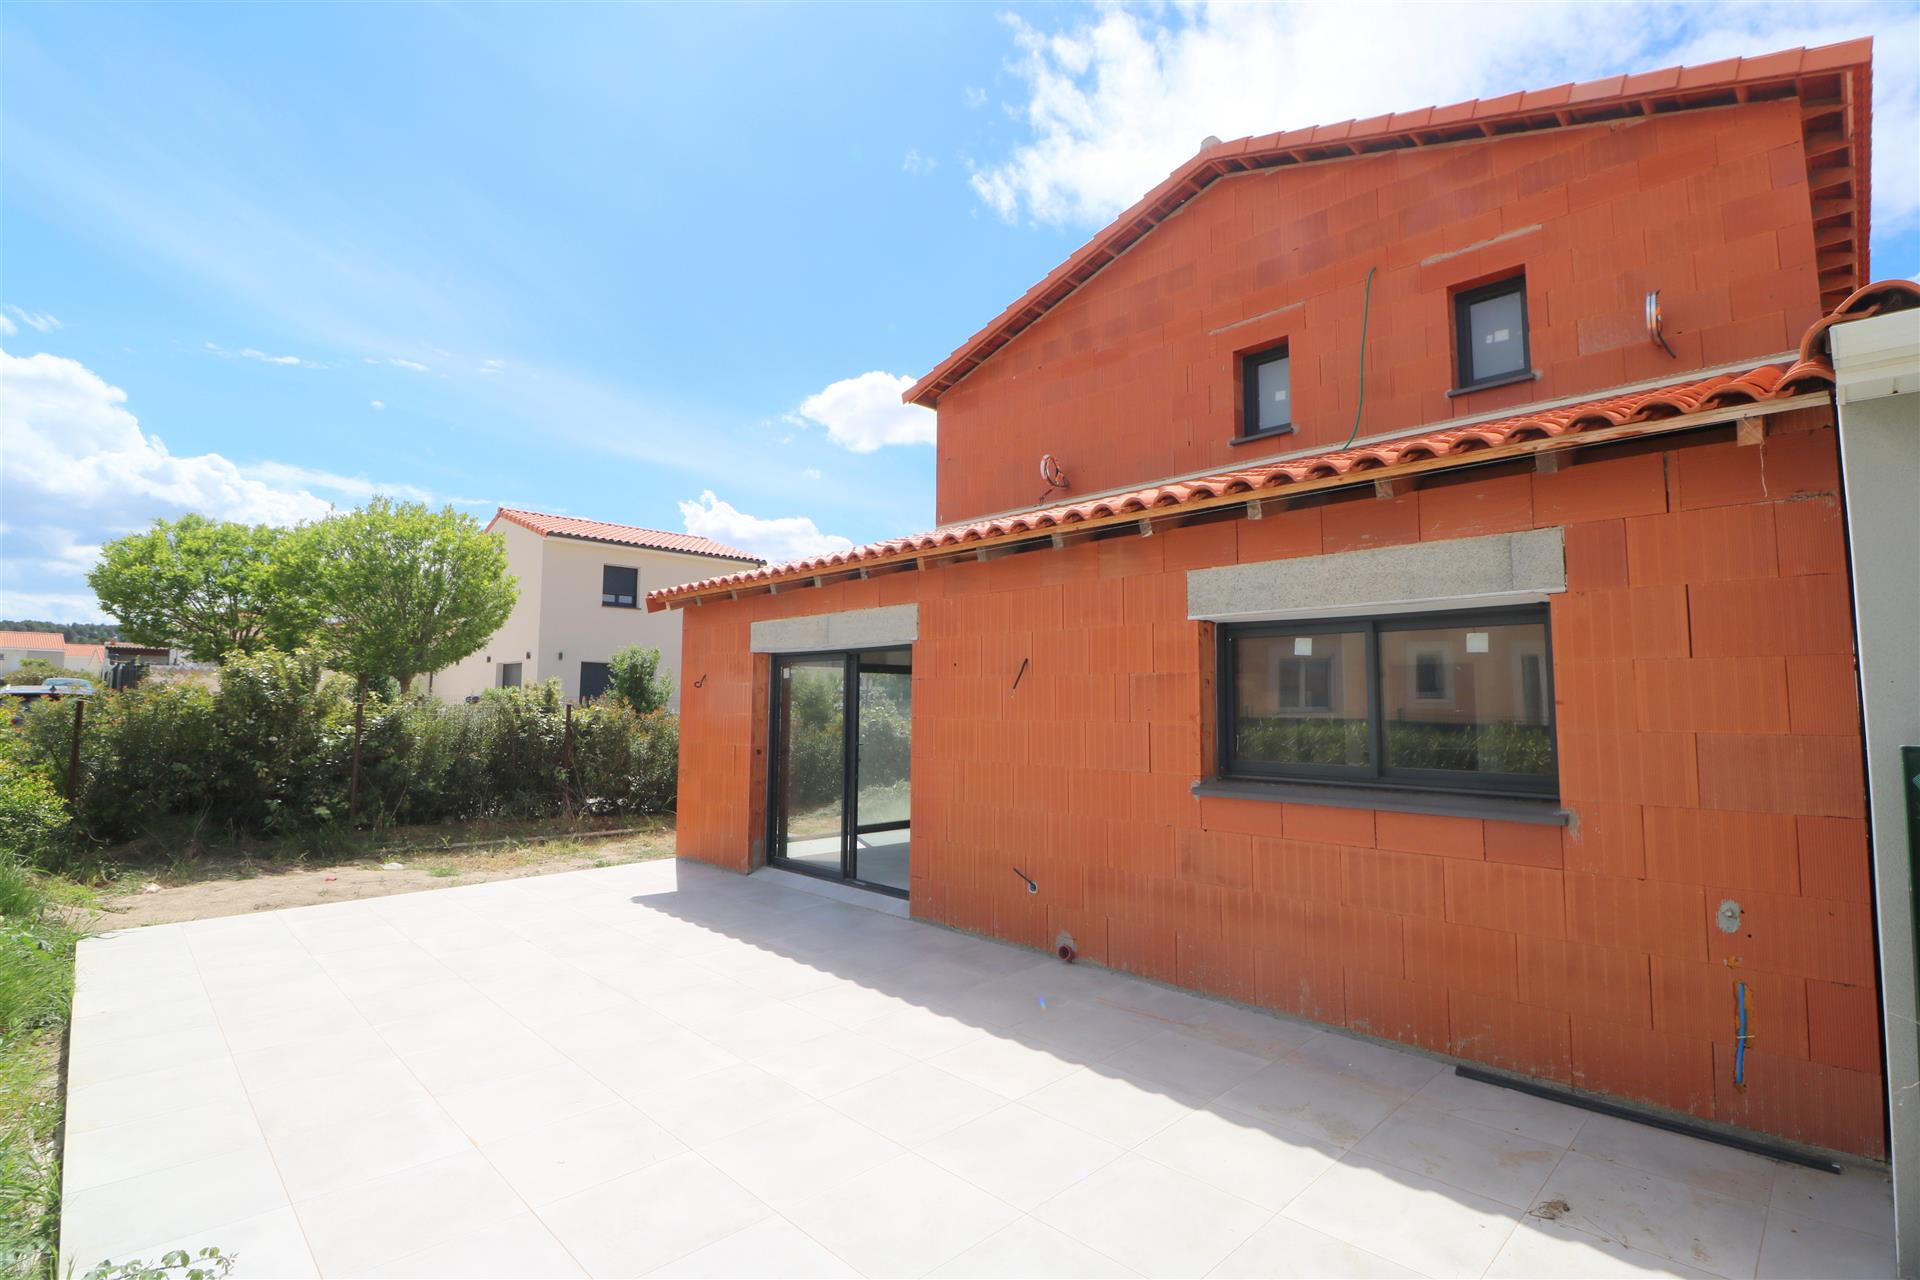 4 bedroom villa of 112 m2 living space in Nissan-lez-Enserune, between Béziers and Narbonne